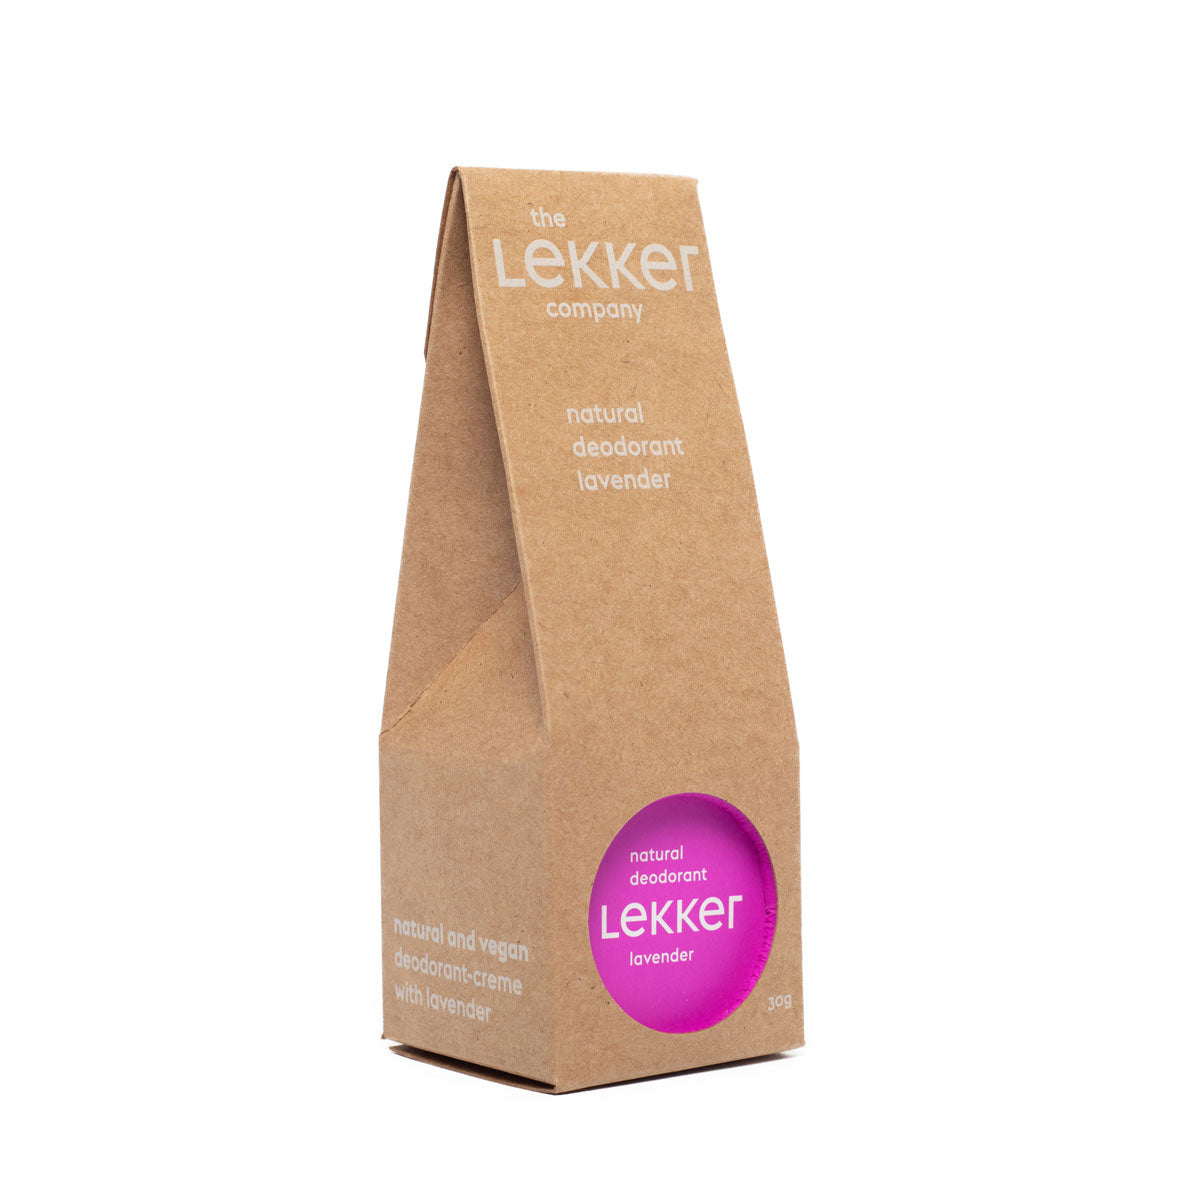 The Lekker Company Natural Deodorant Lavender with Packaging